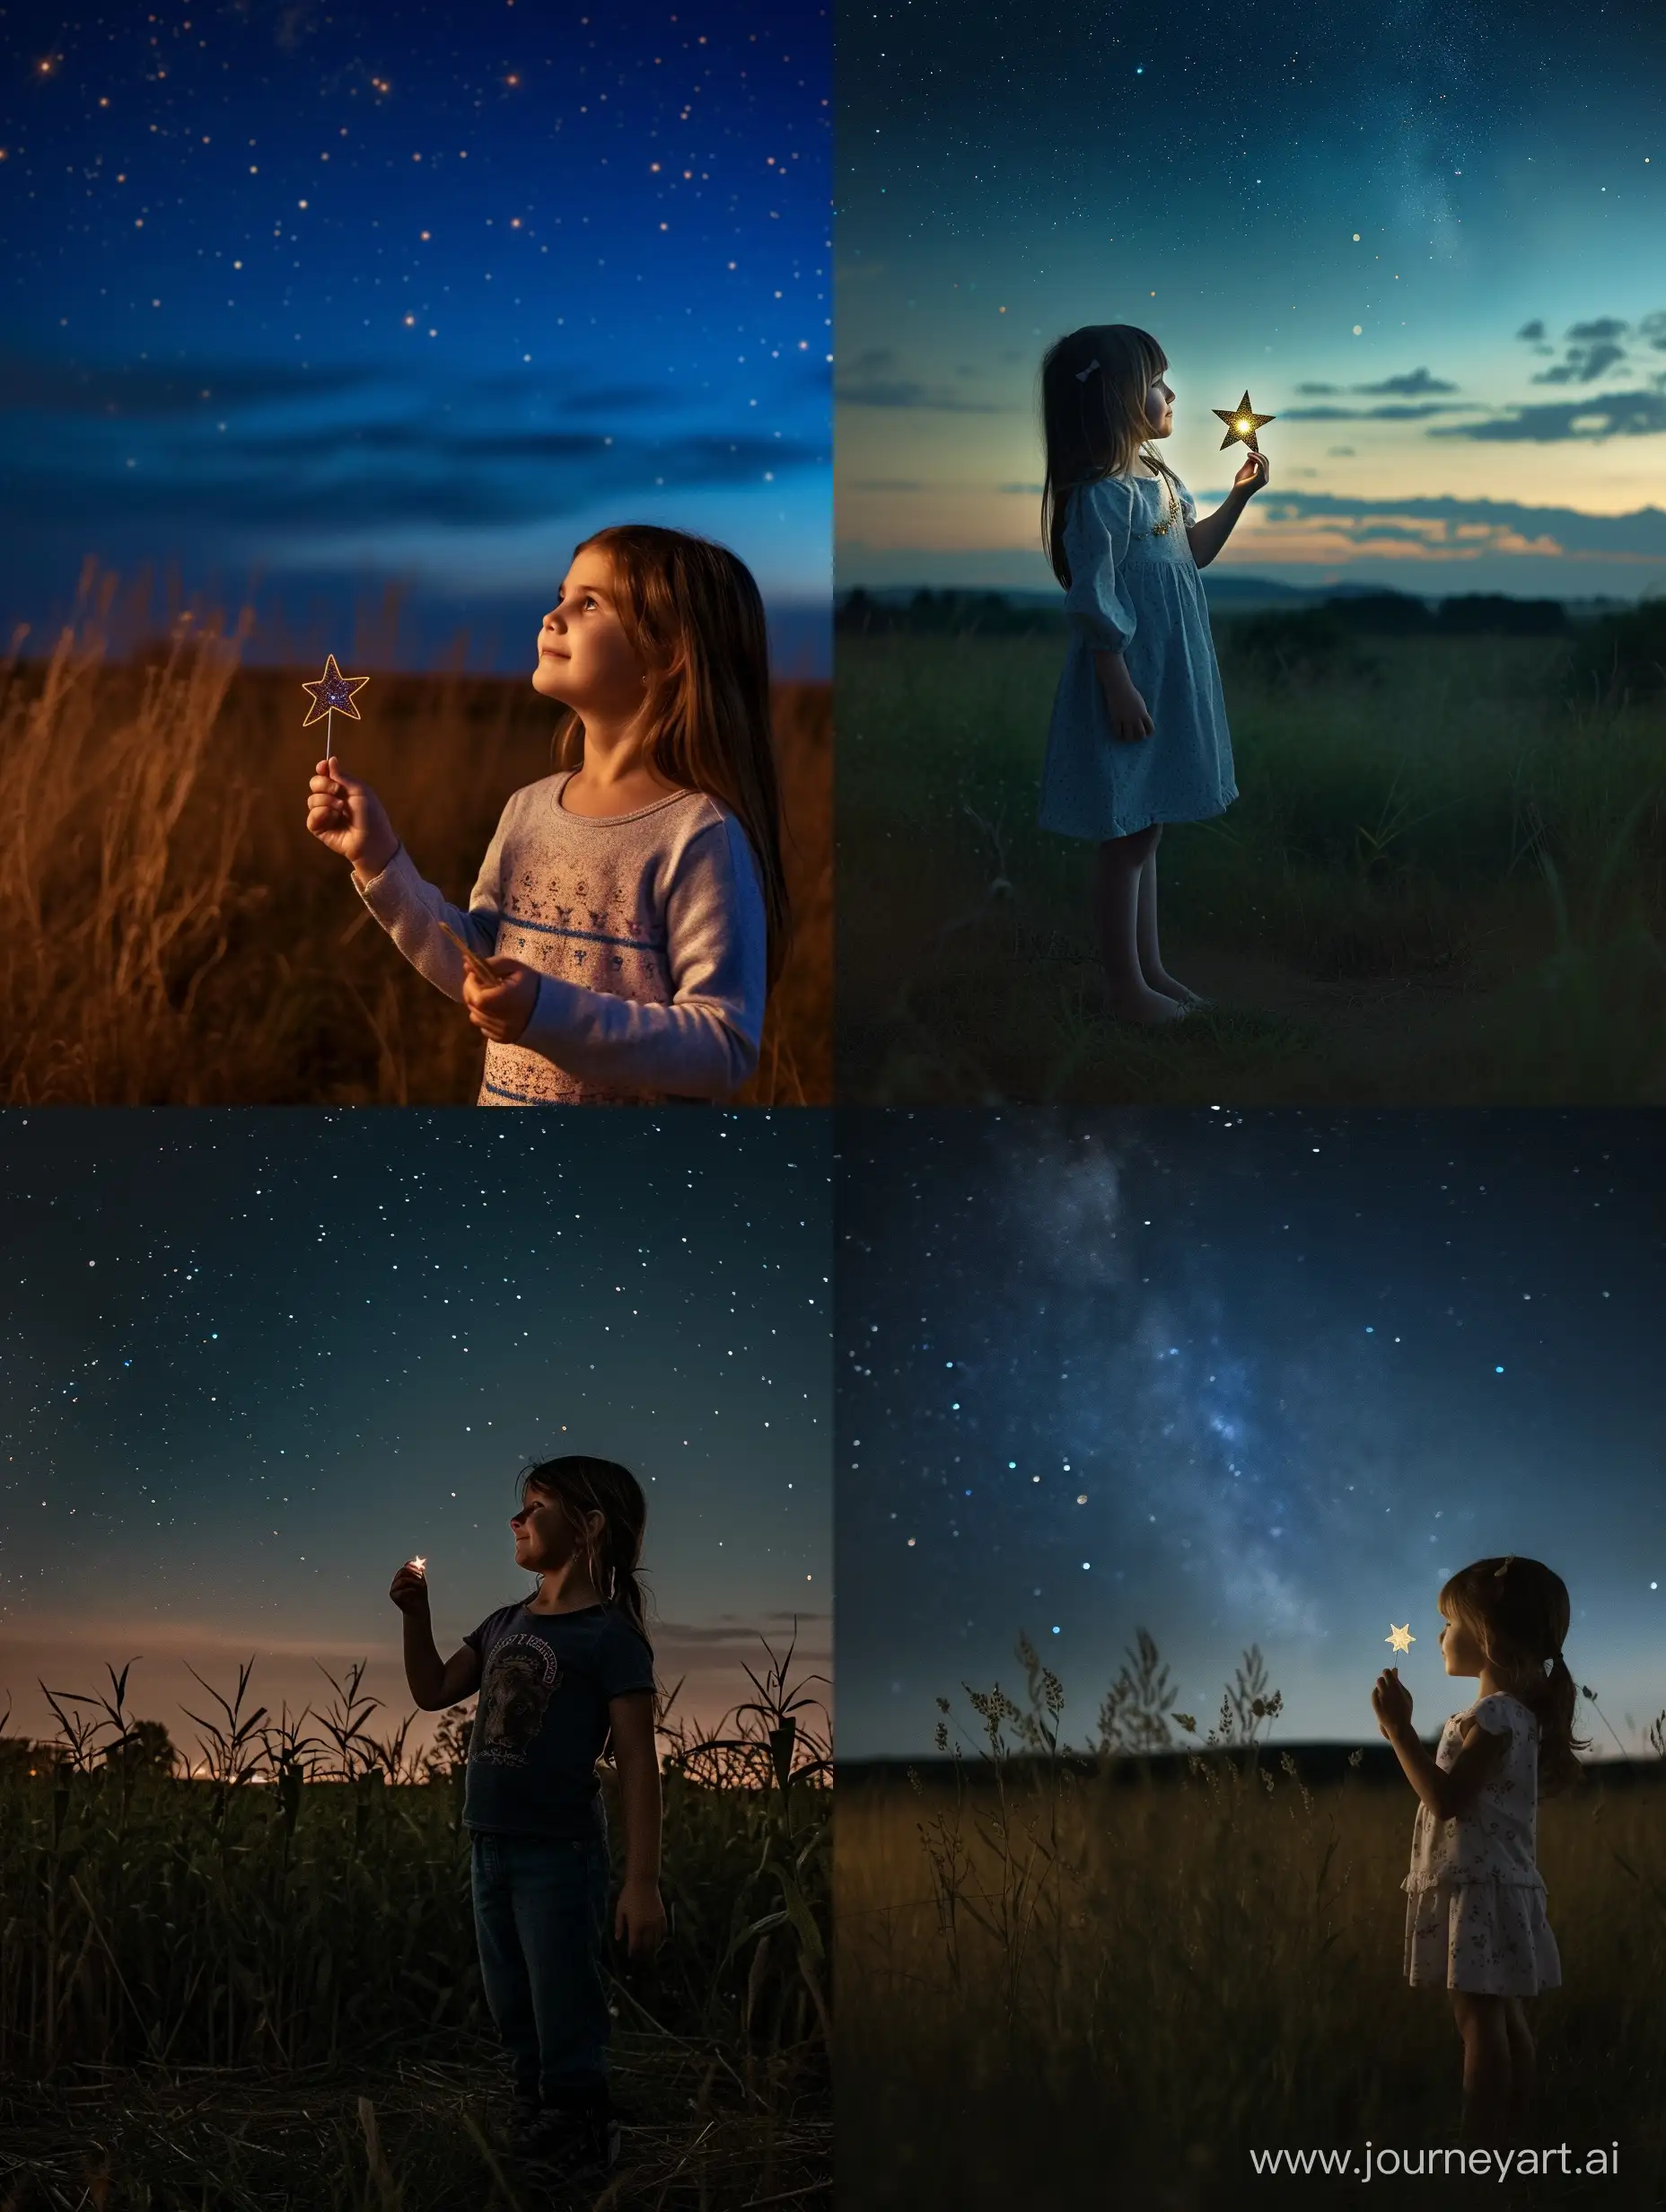 A young girl stands in a field at night holding a star in her hand and looking at the starry sky smiling slightly